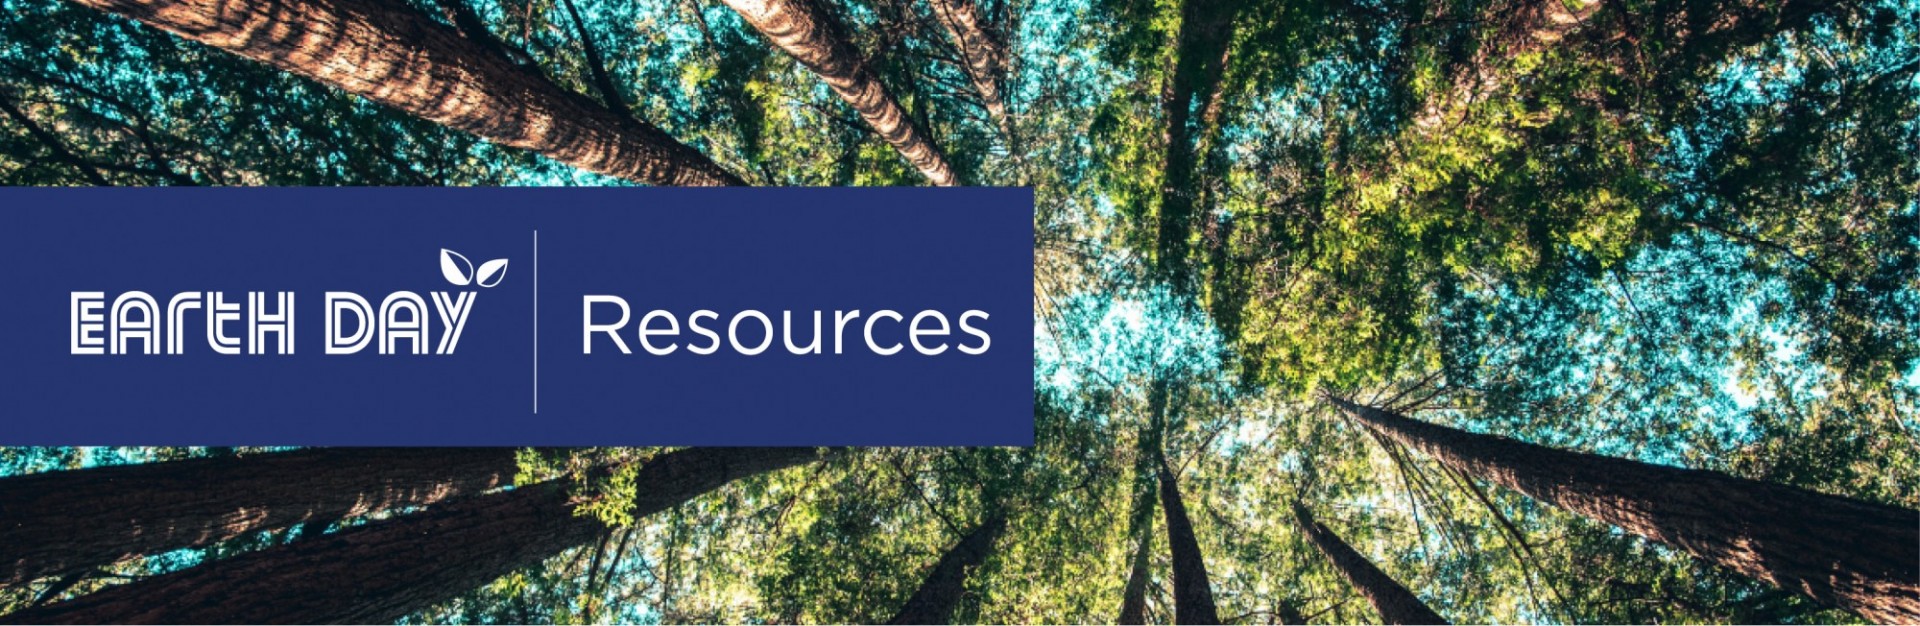 Earth Day Resources